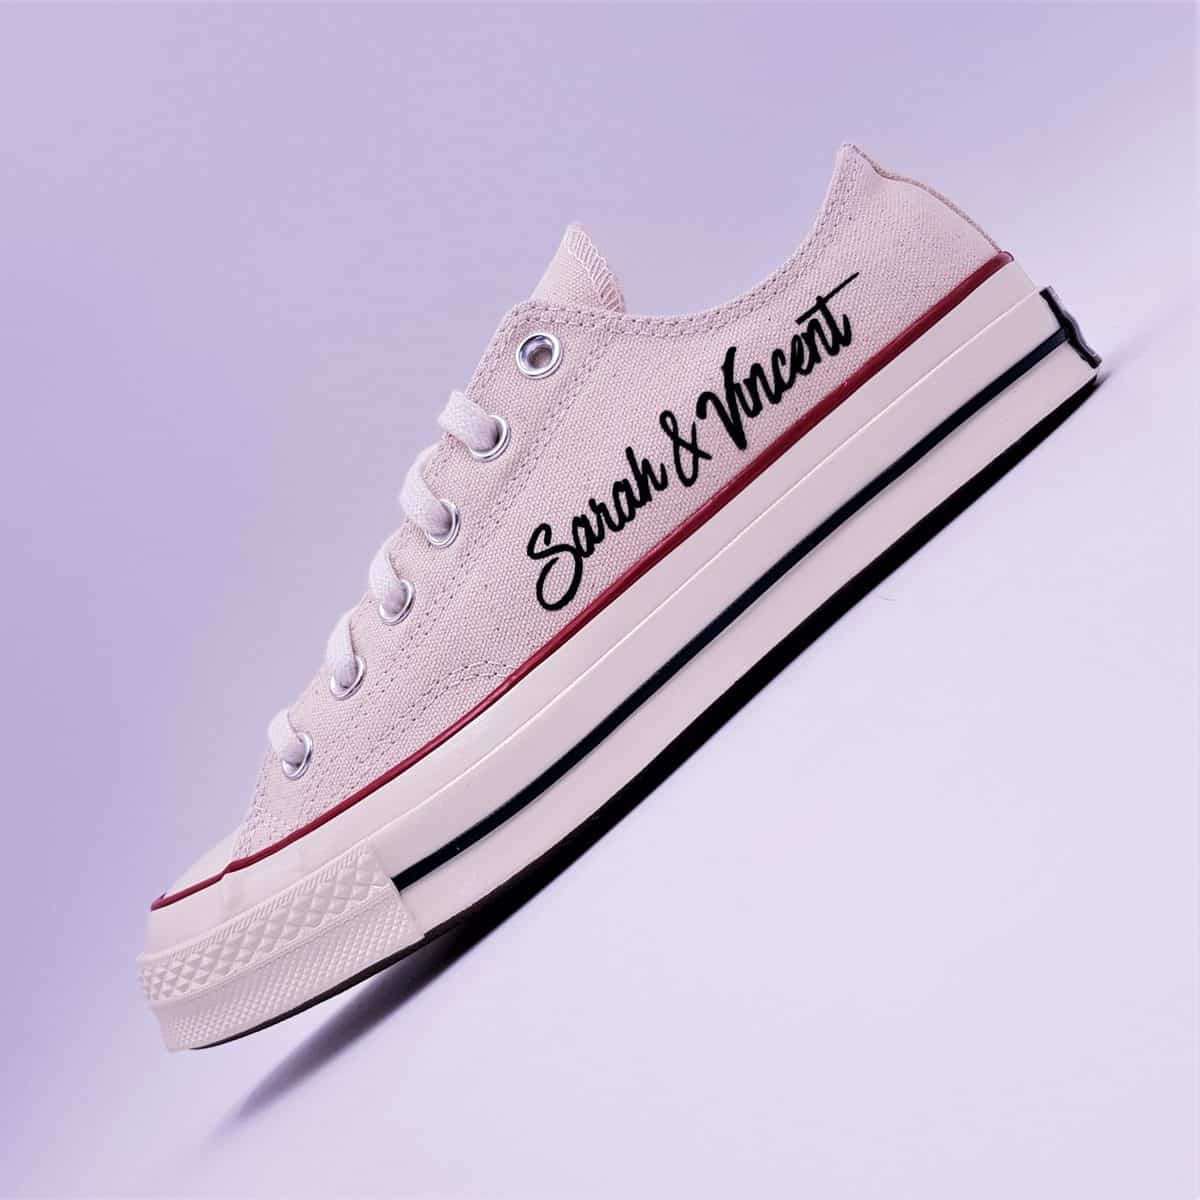 bespoke - Converse 70s personalised - Double G Customs